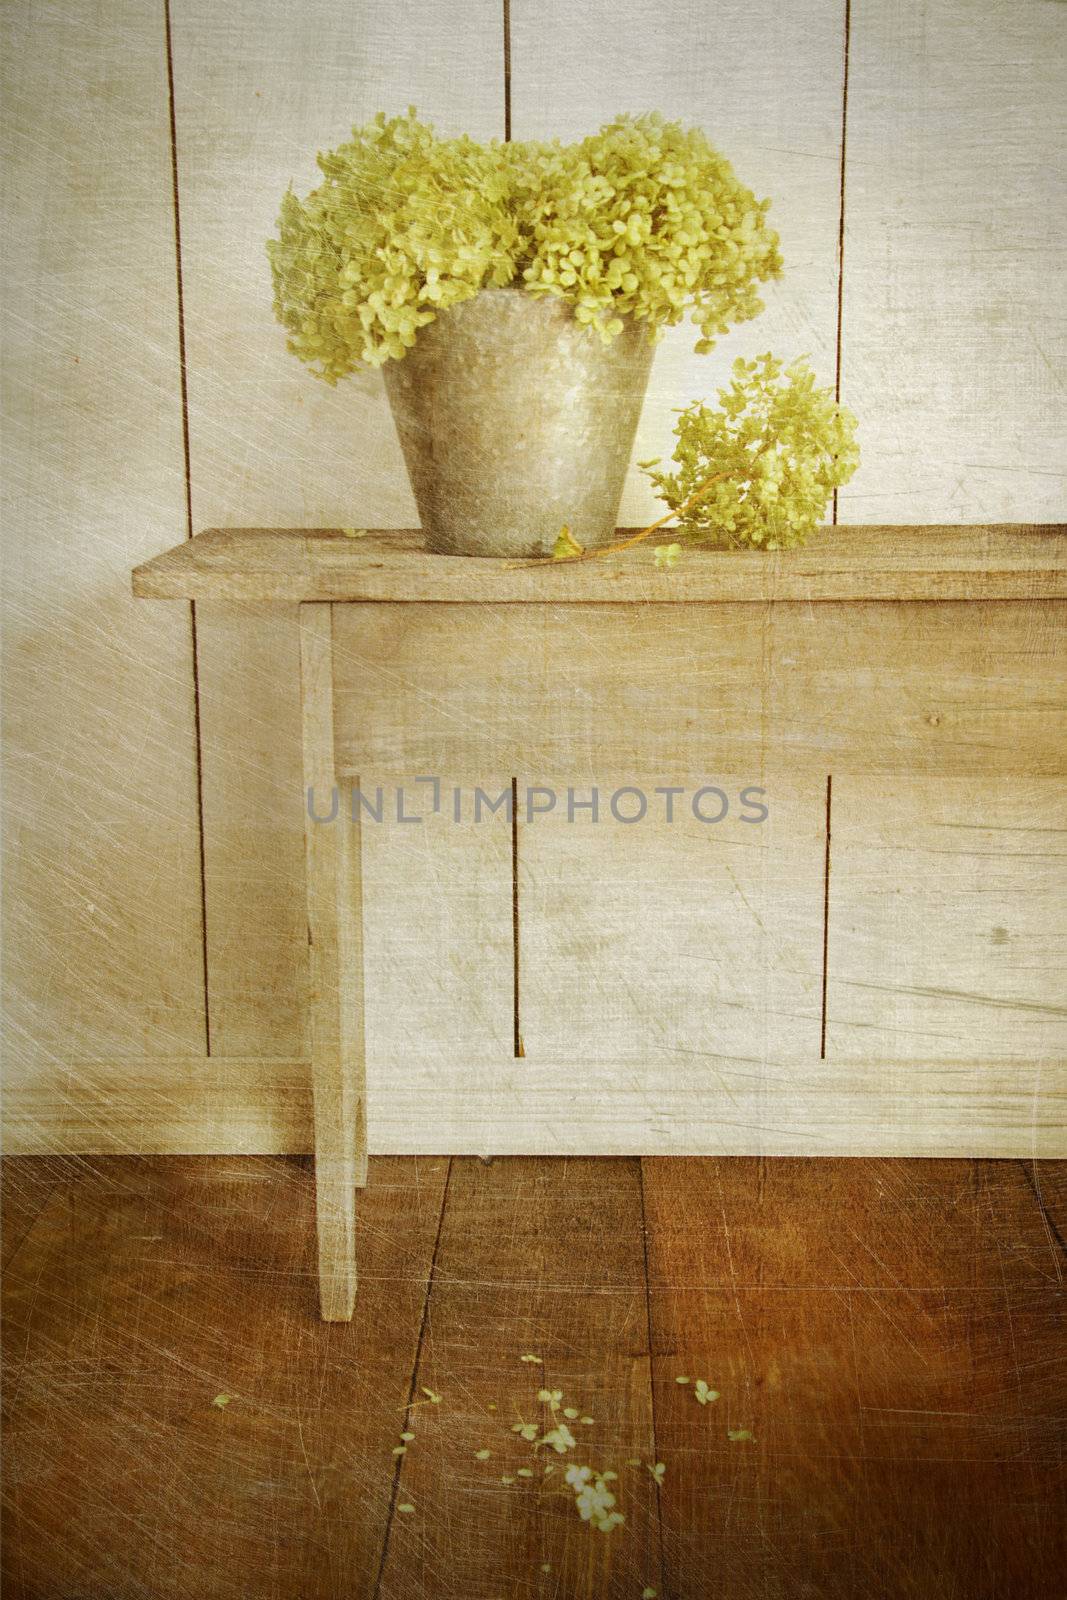 Hydrangea flowers with age vintage look by Sandralise